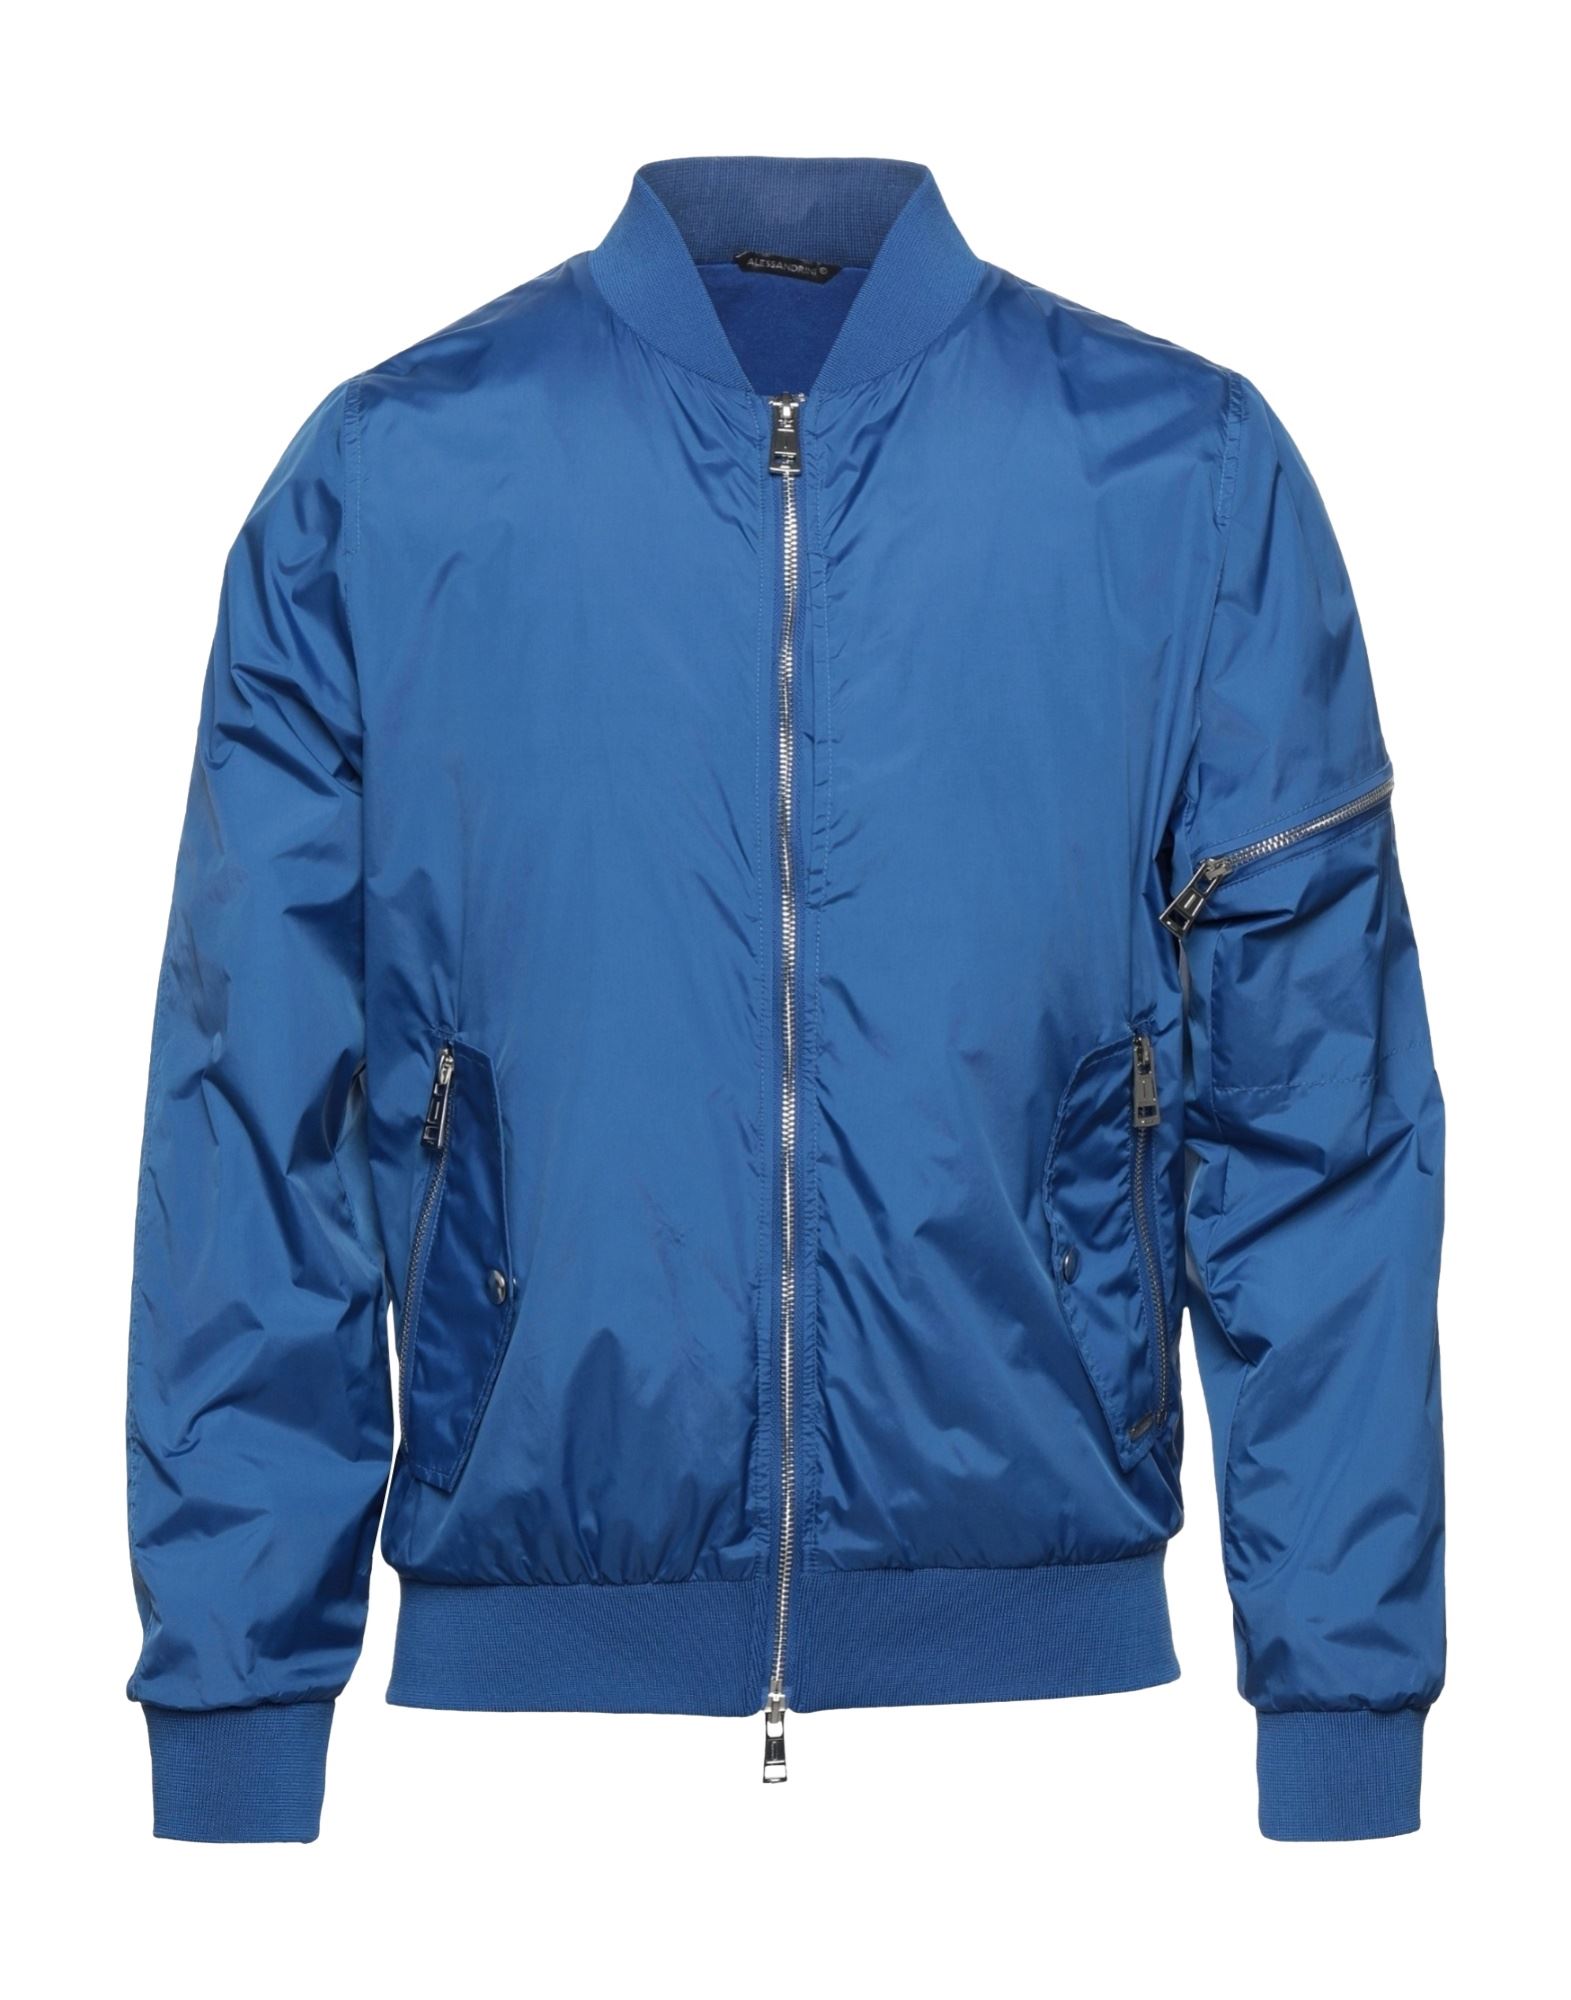 Daniele Alessandrini Homme Jackets In Bright Blue